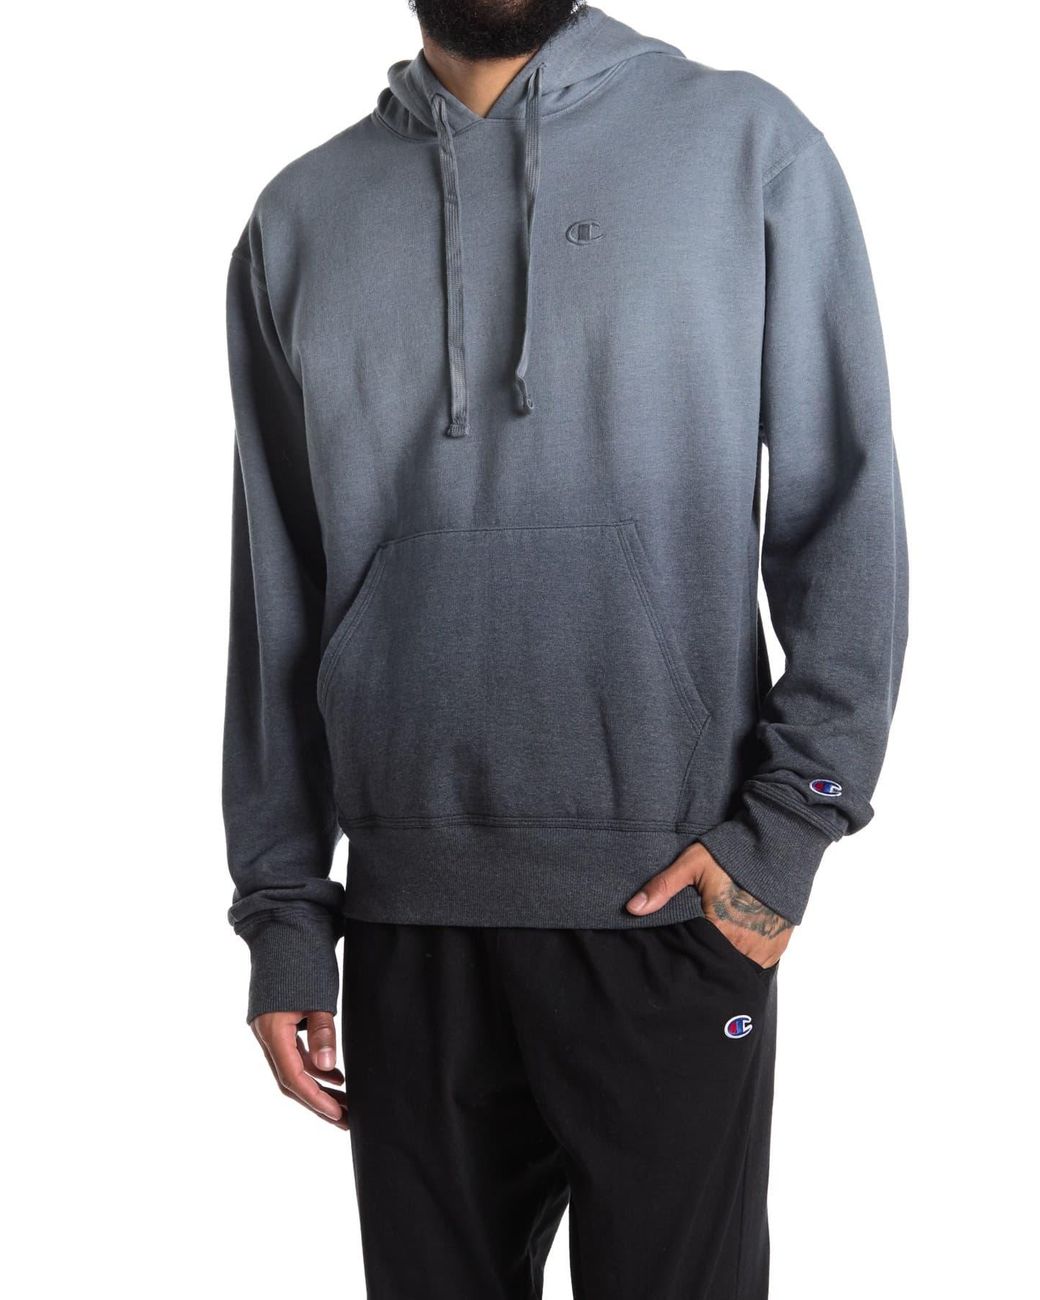 Champion Powerblend Ombre Drawstring Hoodie in Gray for Men - Lyst